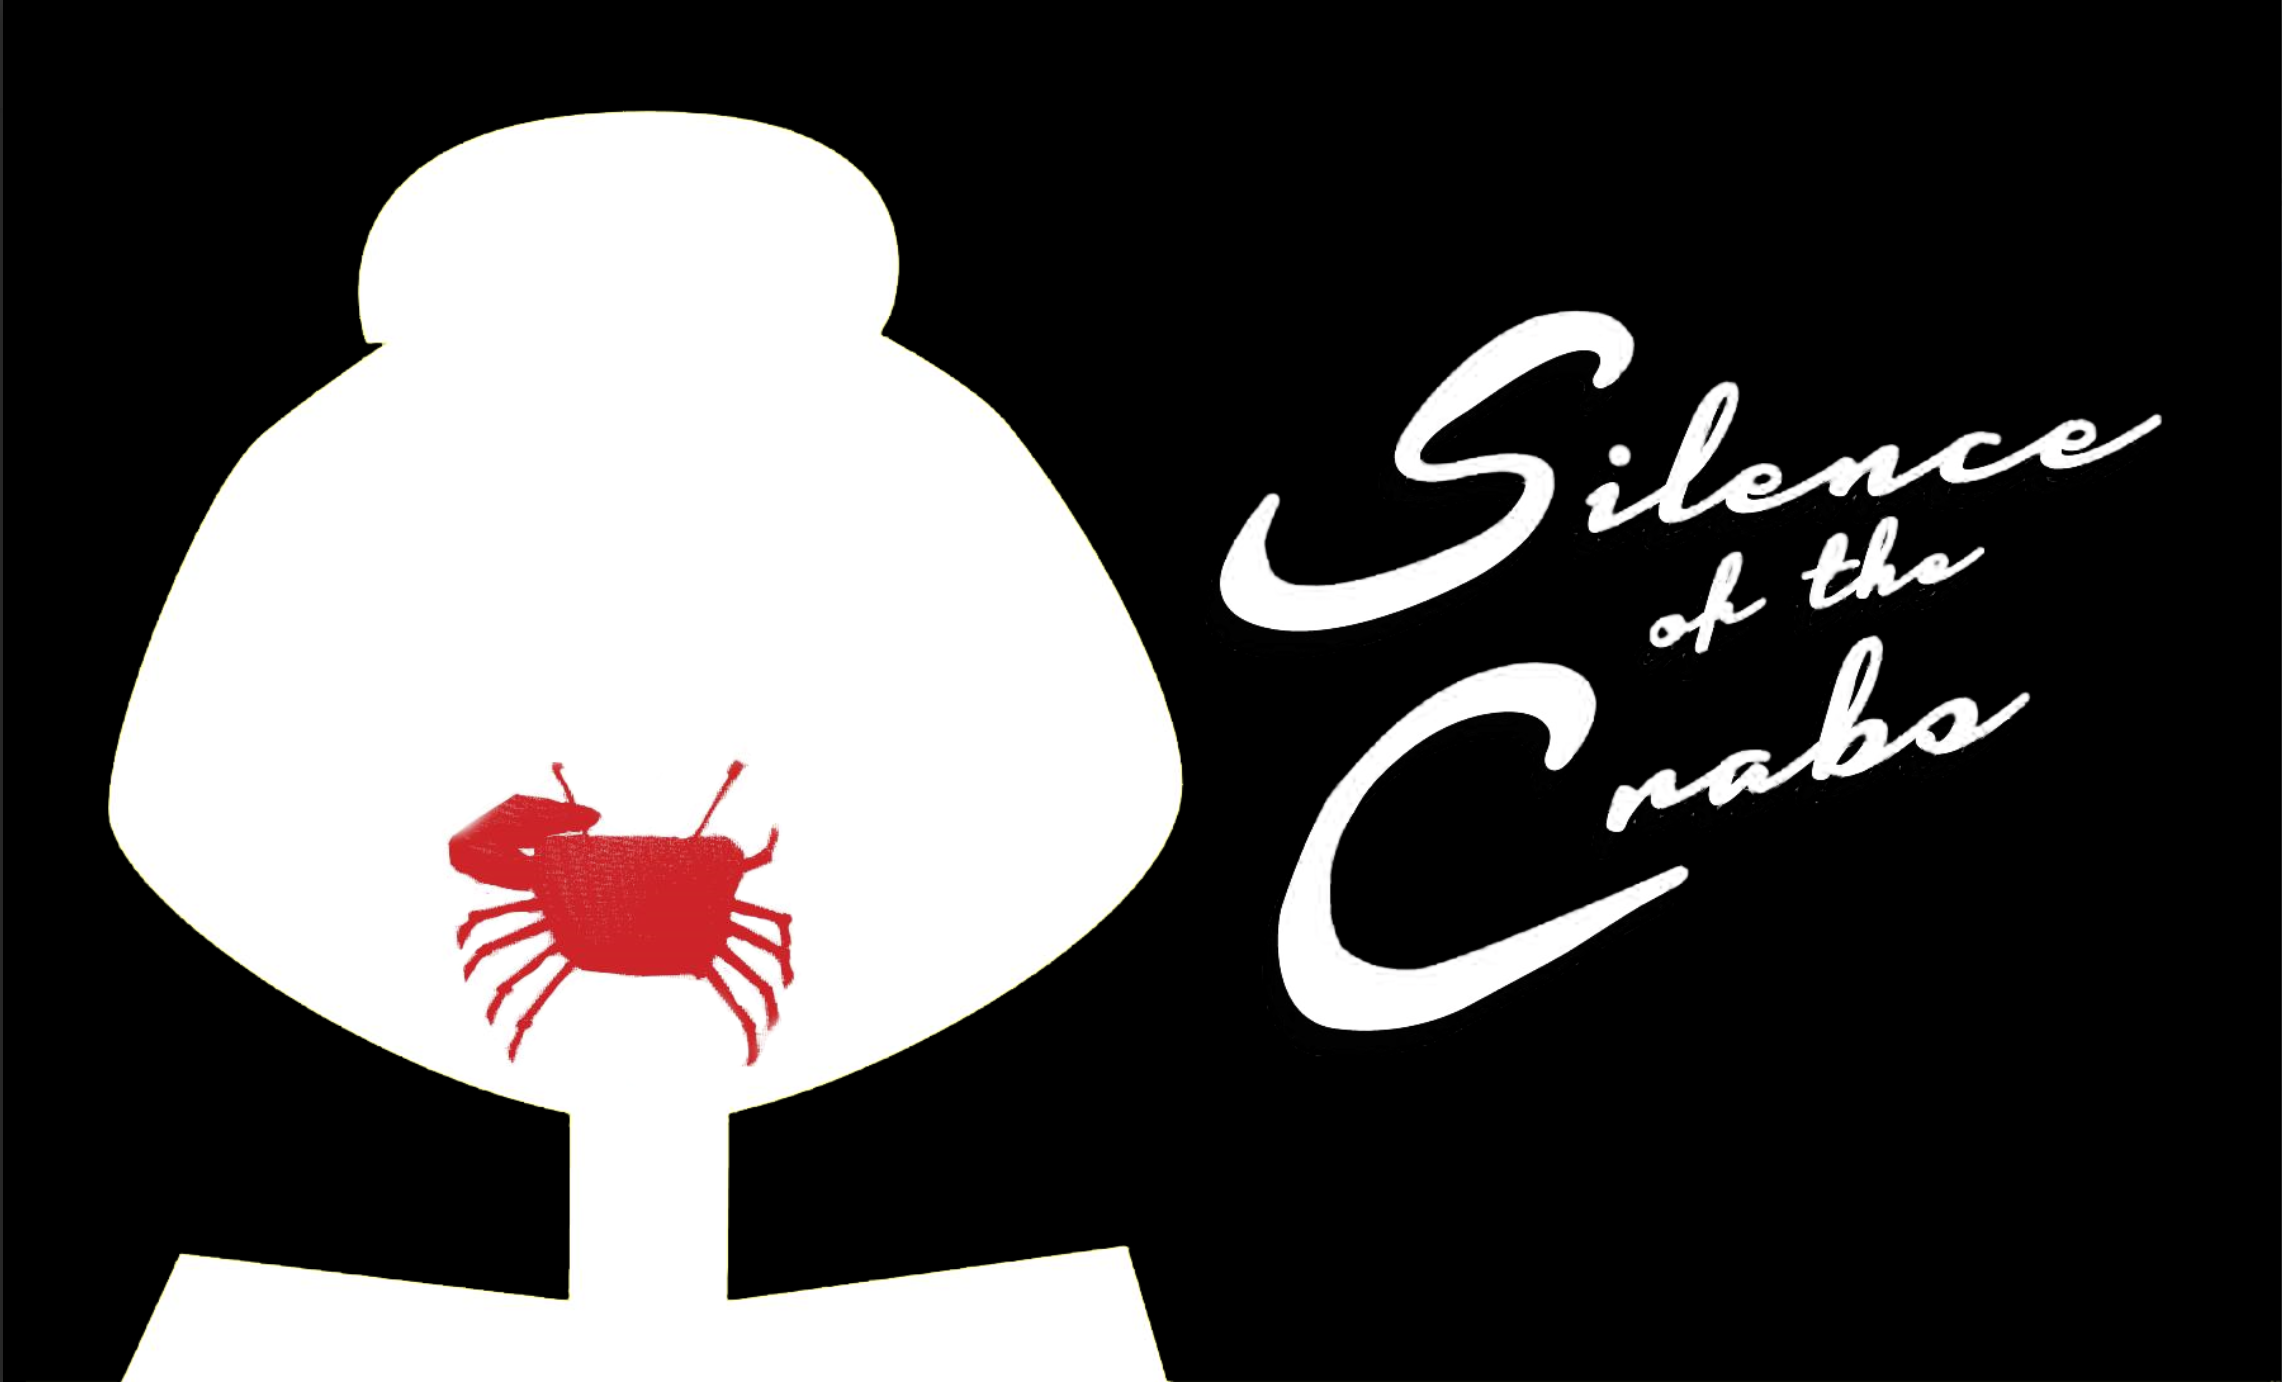 Silence of the crabs mac os download